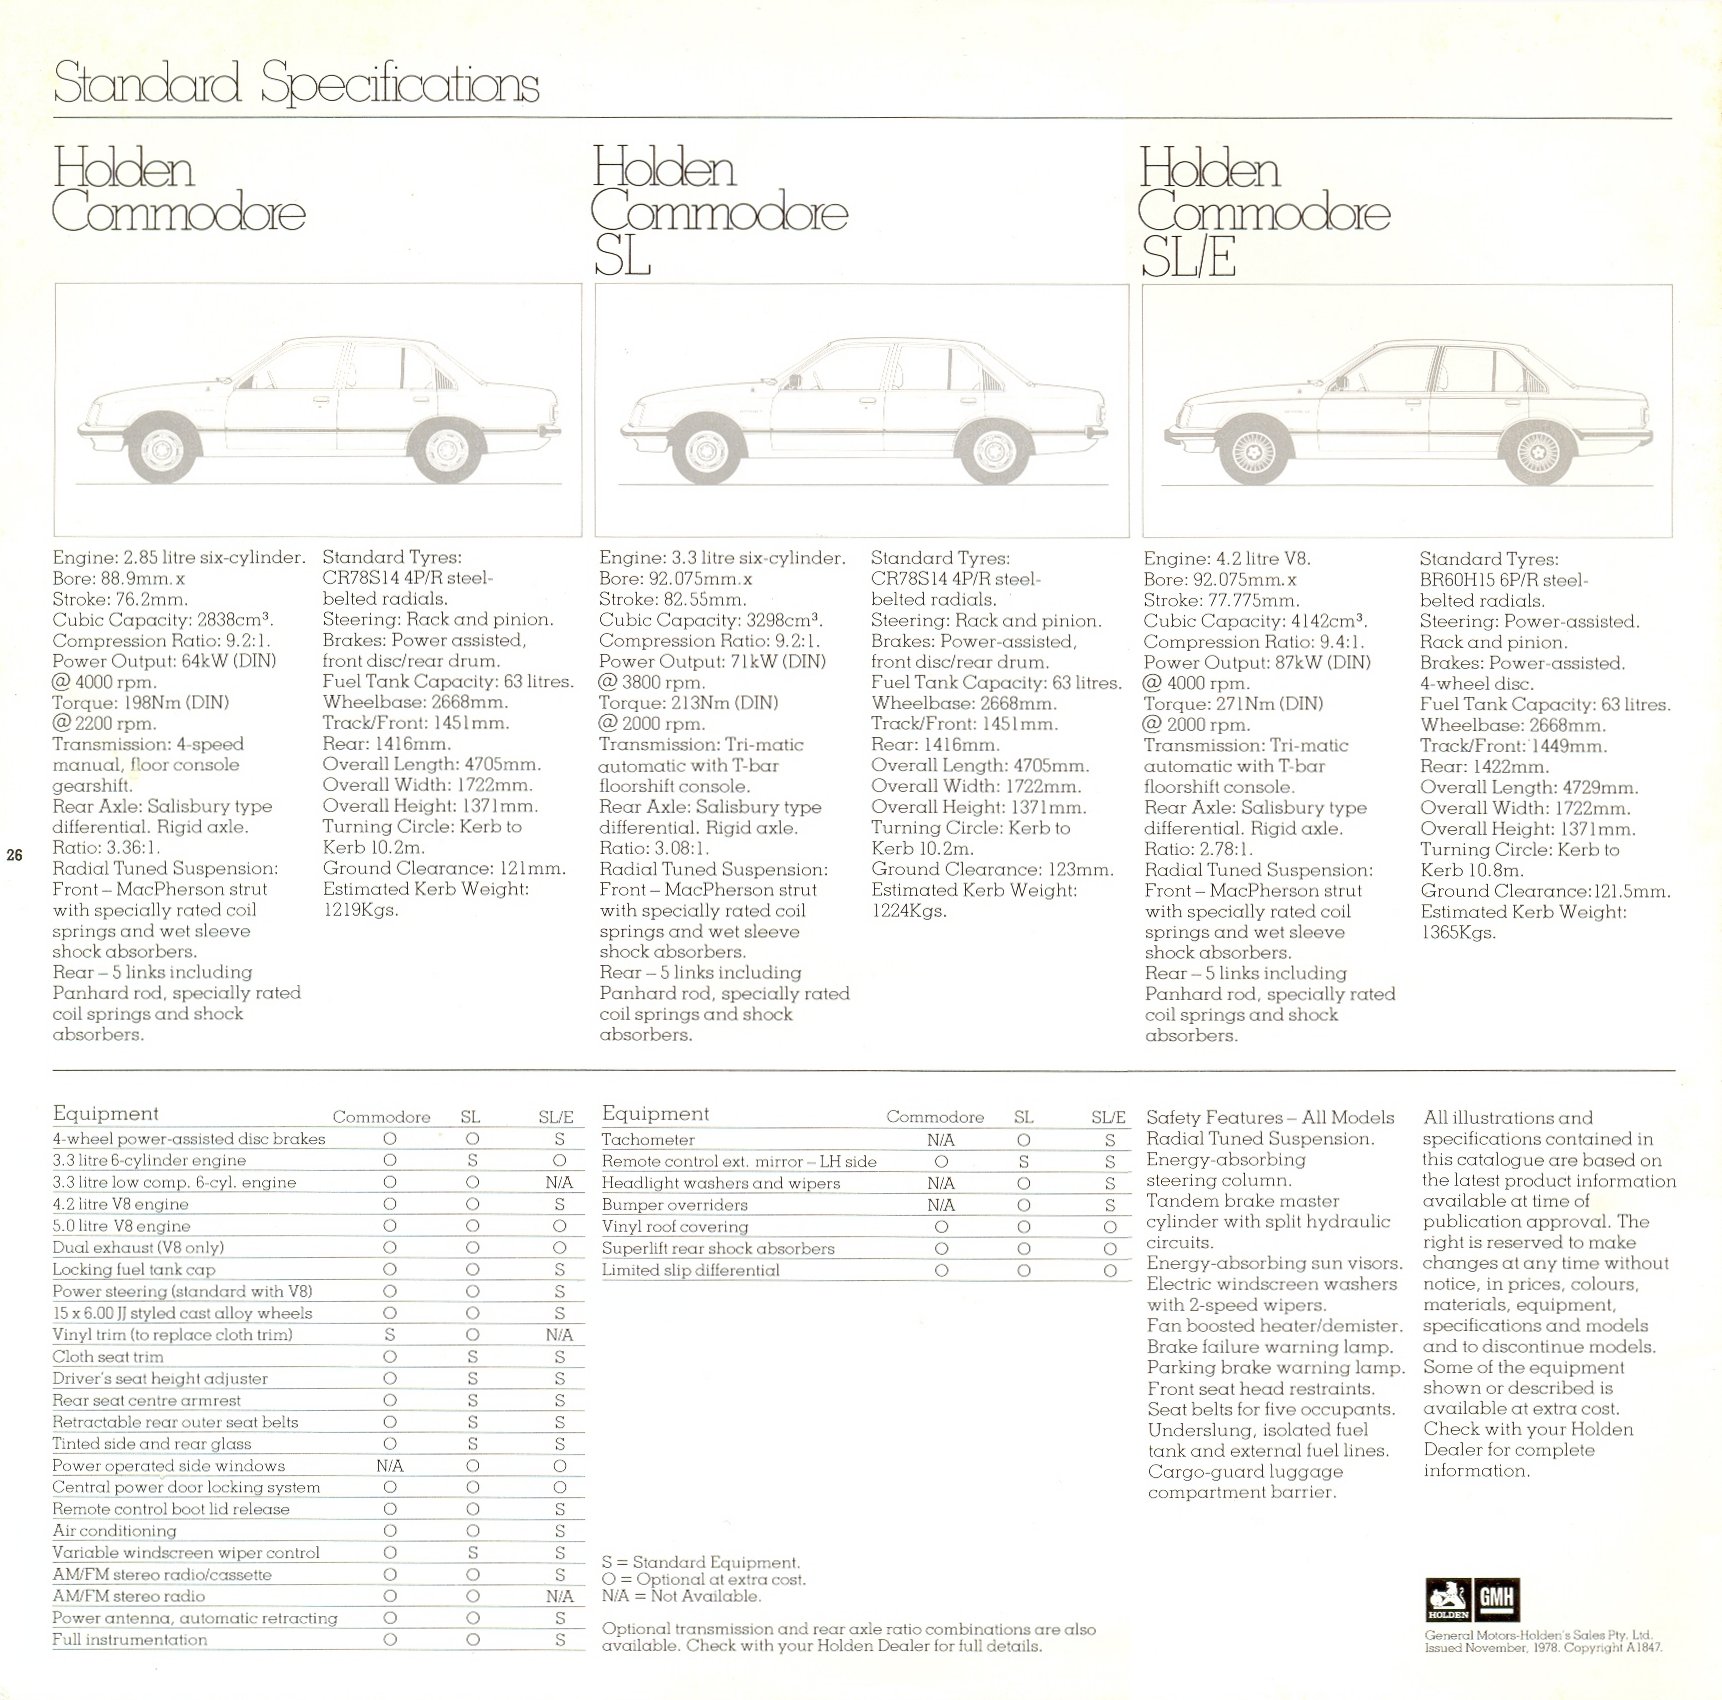 1978 Holden Commodore Brochure Page 12